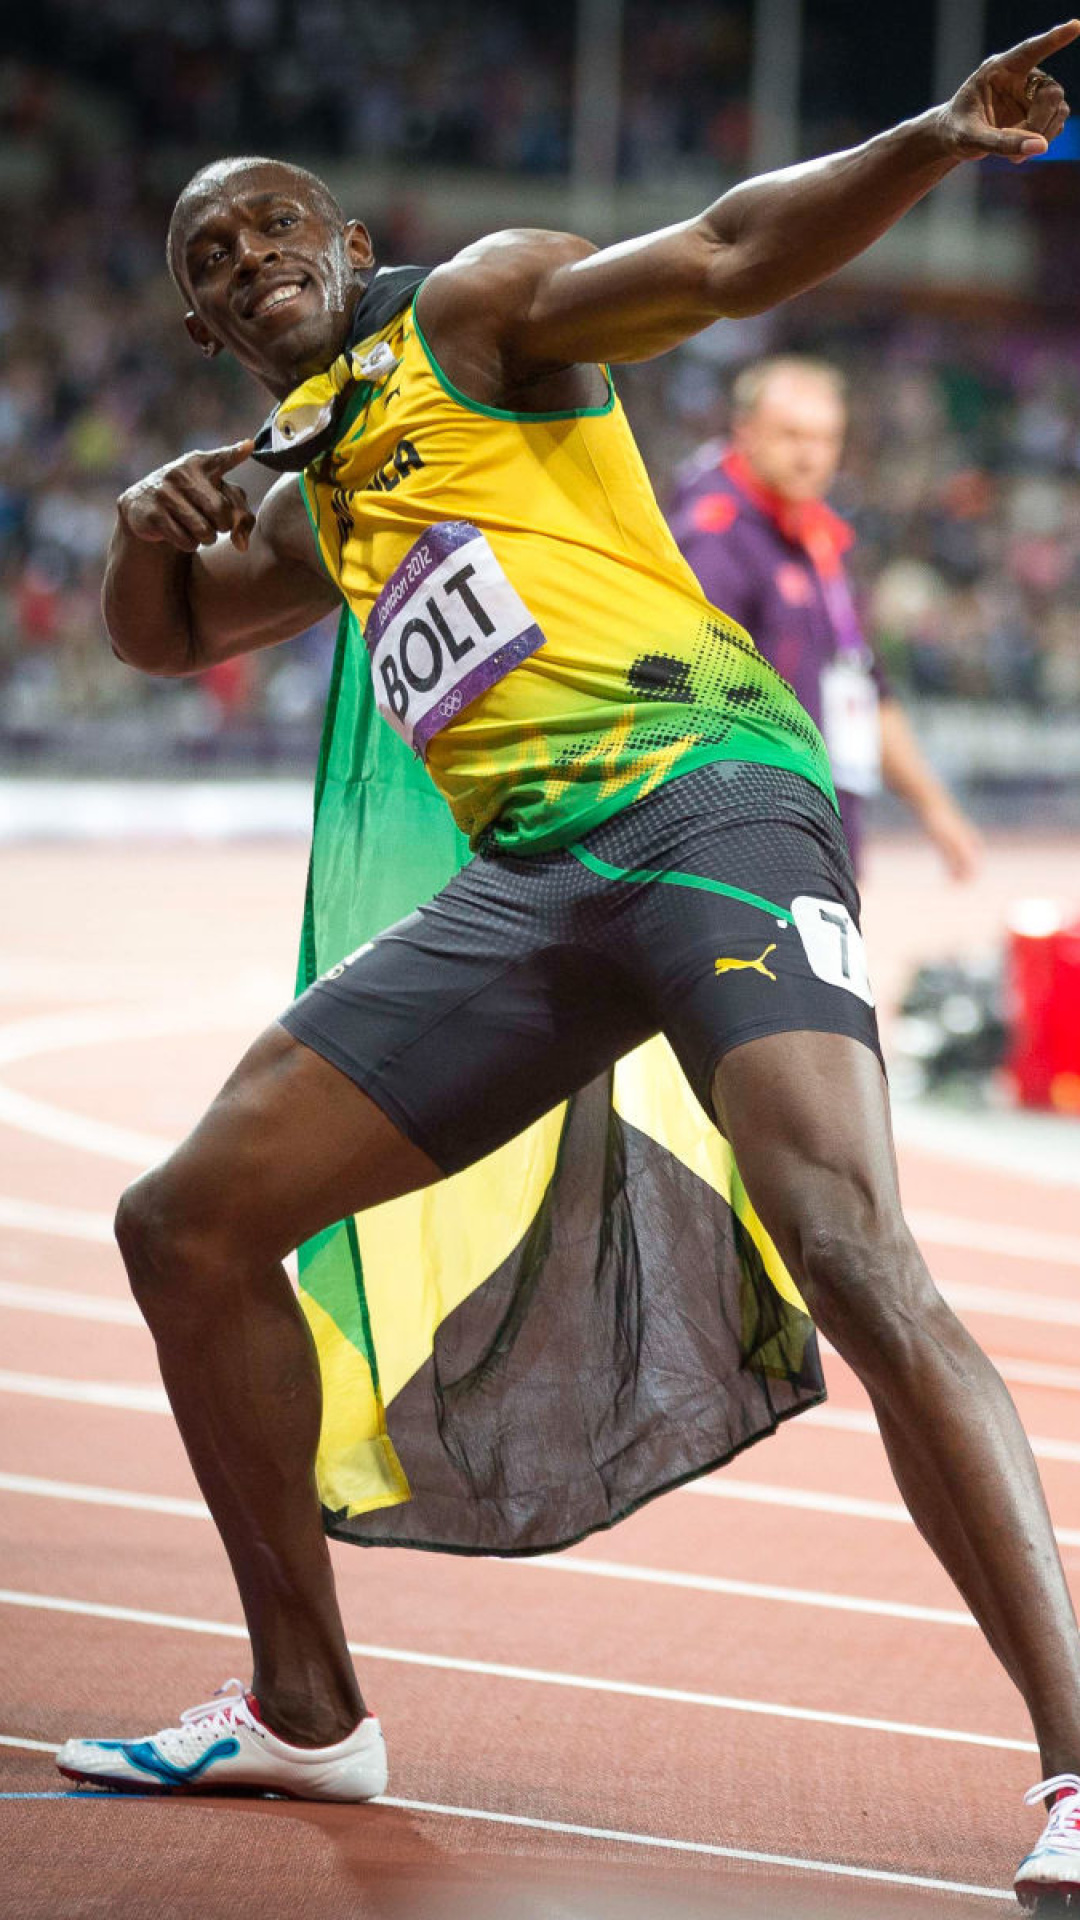 Das Usain Bolt won medals in the Olympics Wallpaper 1080x1920